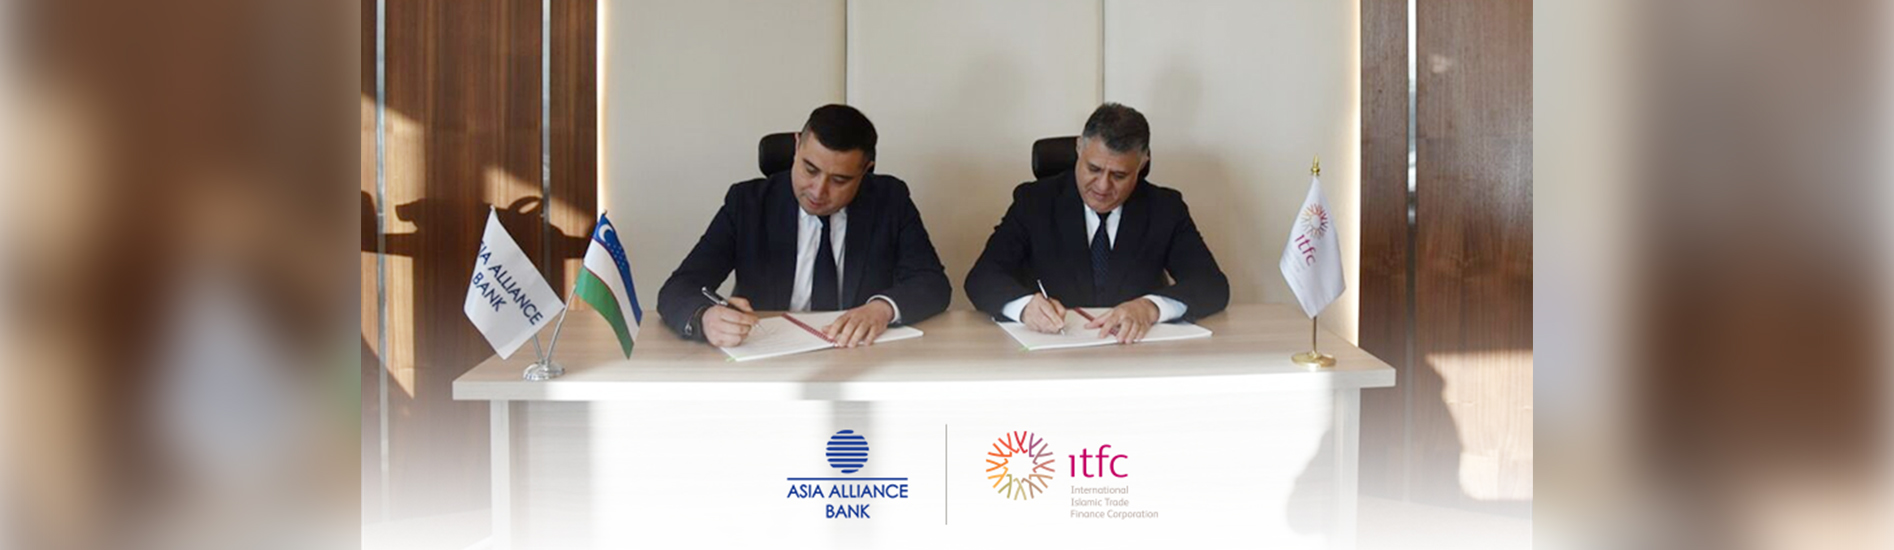 ITFC and Asia Alliance Bank Sign US$ 10 Million Line of Trade Financing Agreement to Boost Private Sector and SME Support in Uzbekistan